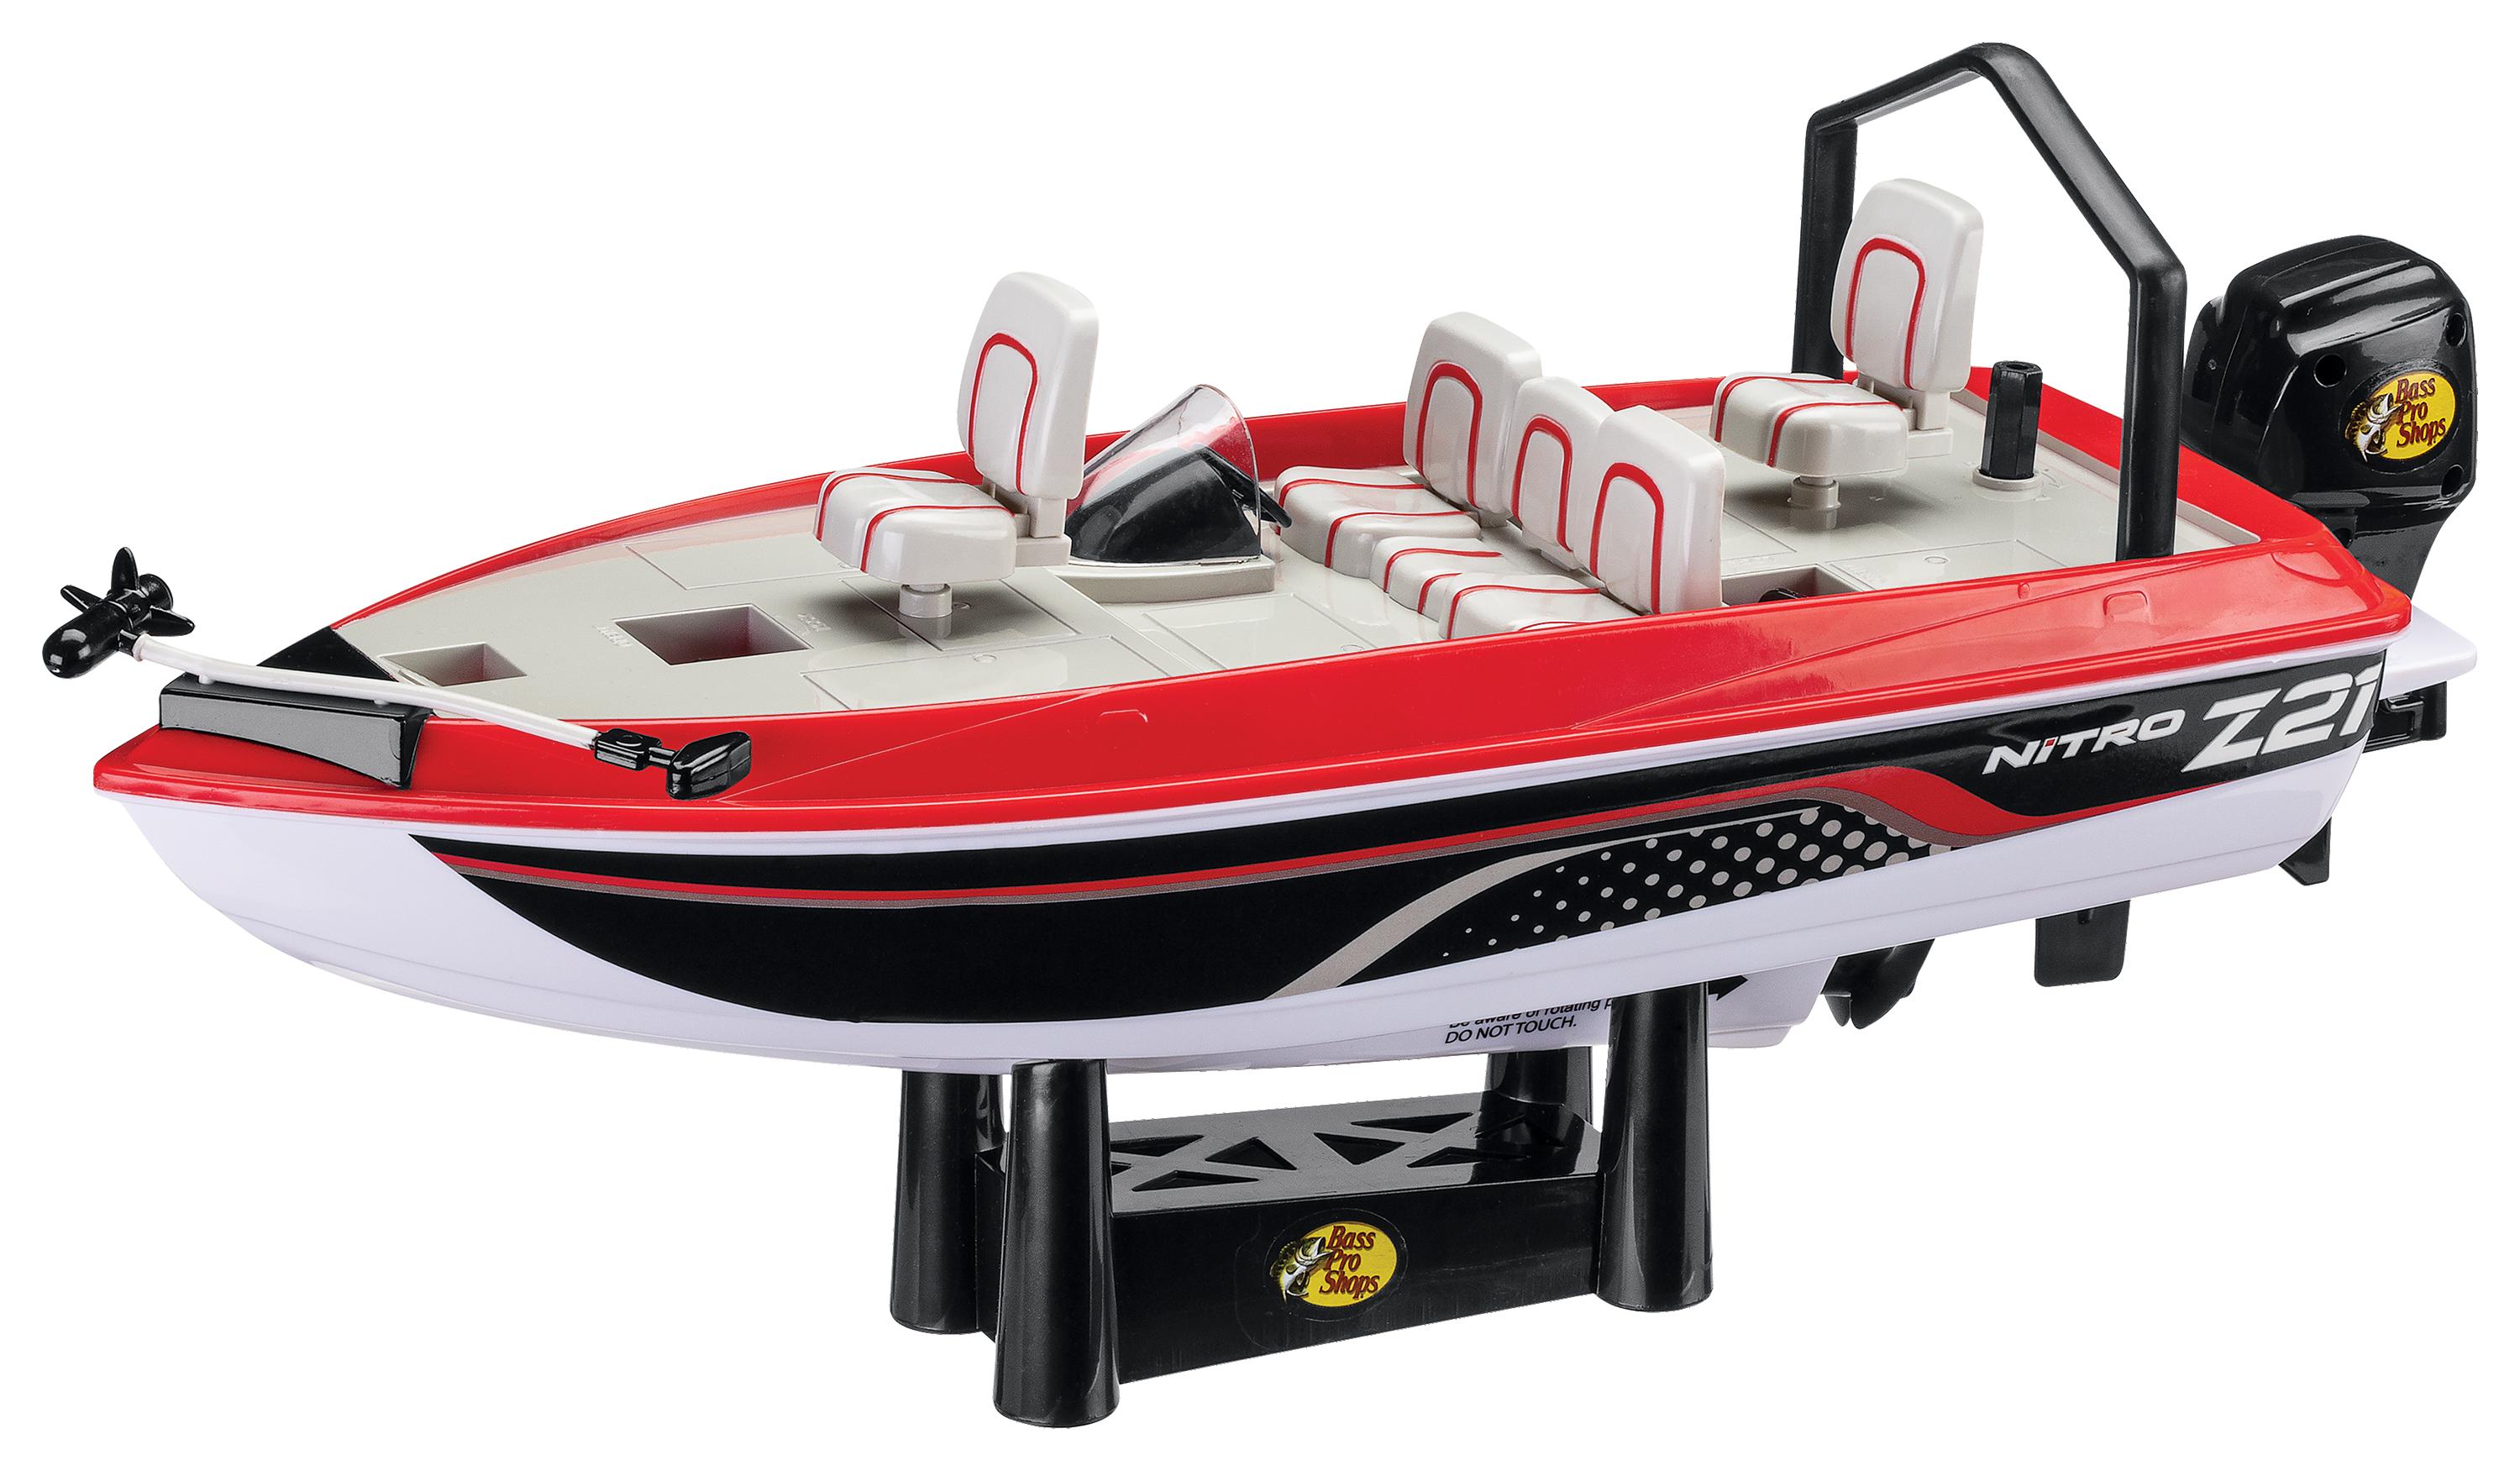 Remote Control Boat That Catches Fish: Maximize your fishing success with a remote control boat.